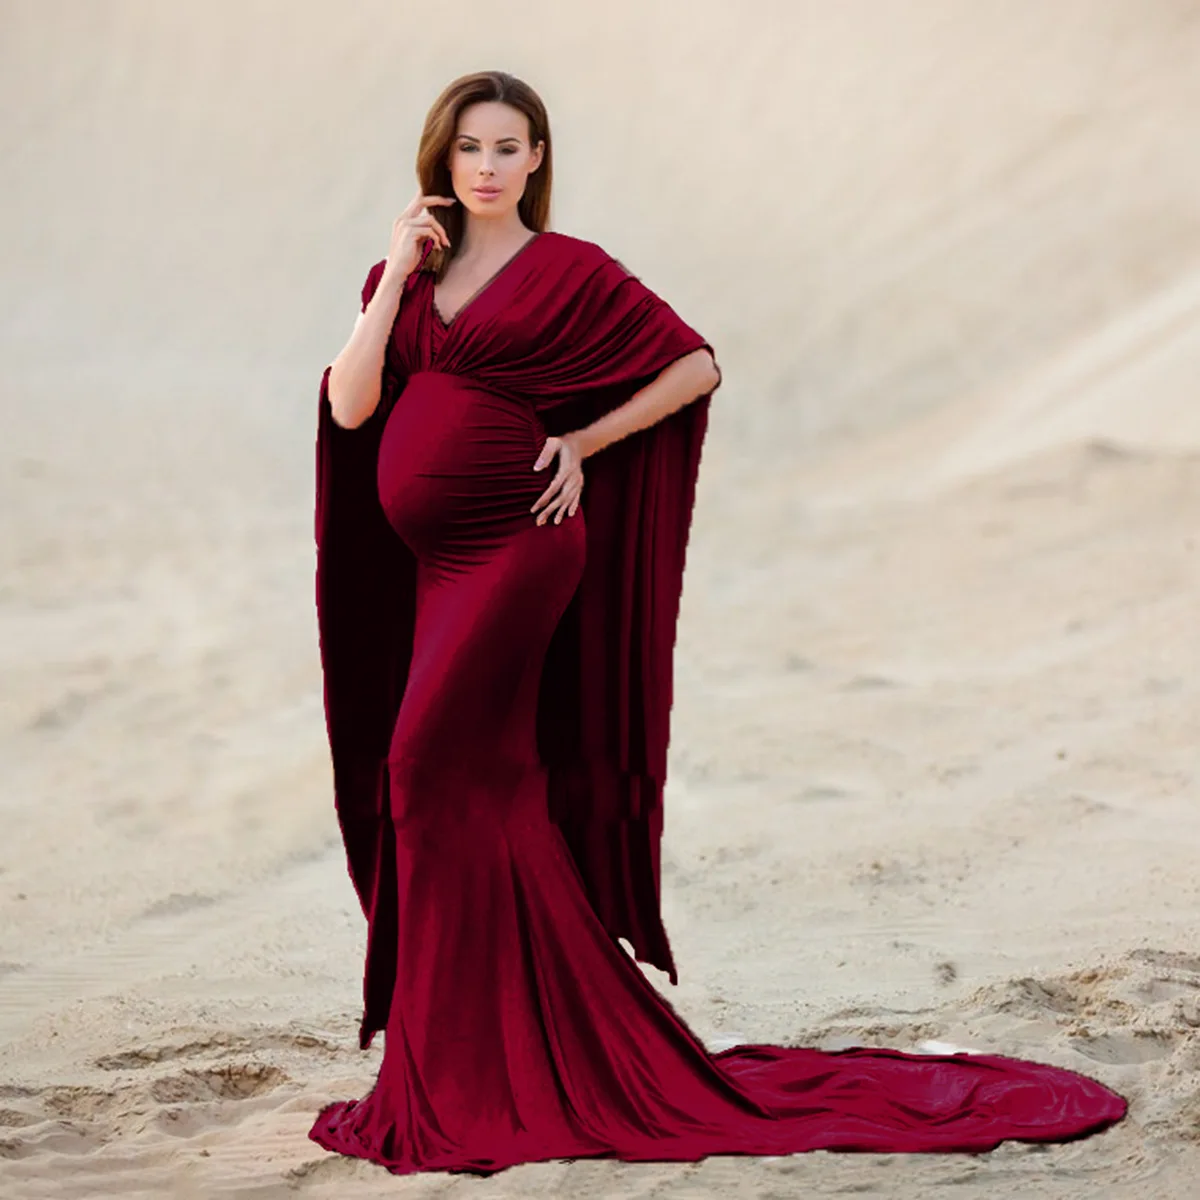 Sexy Maternity Dresses For Baby Showers Photo Shoot Short Sleeve Gown Dresses Elegence Pregnant Dress Women Photography Prop enlarge